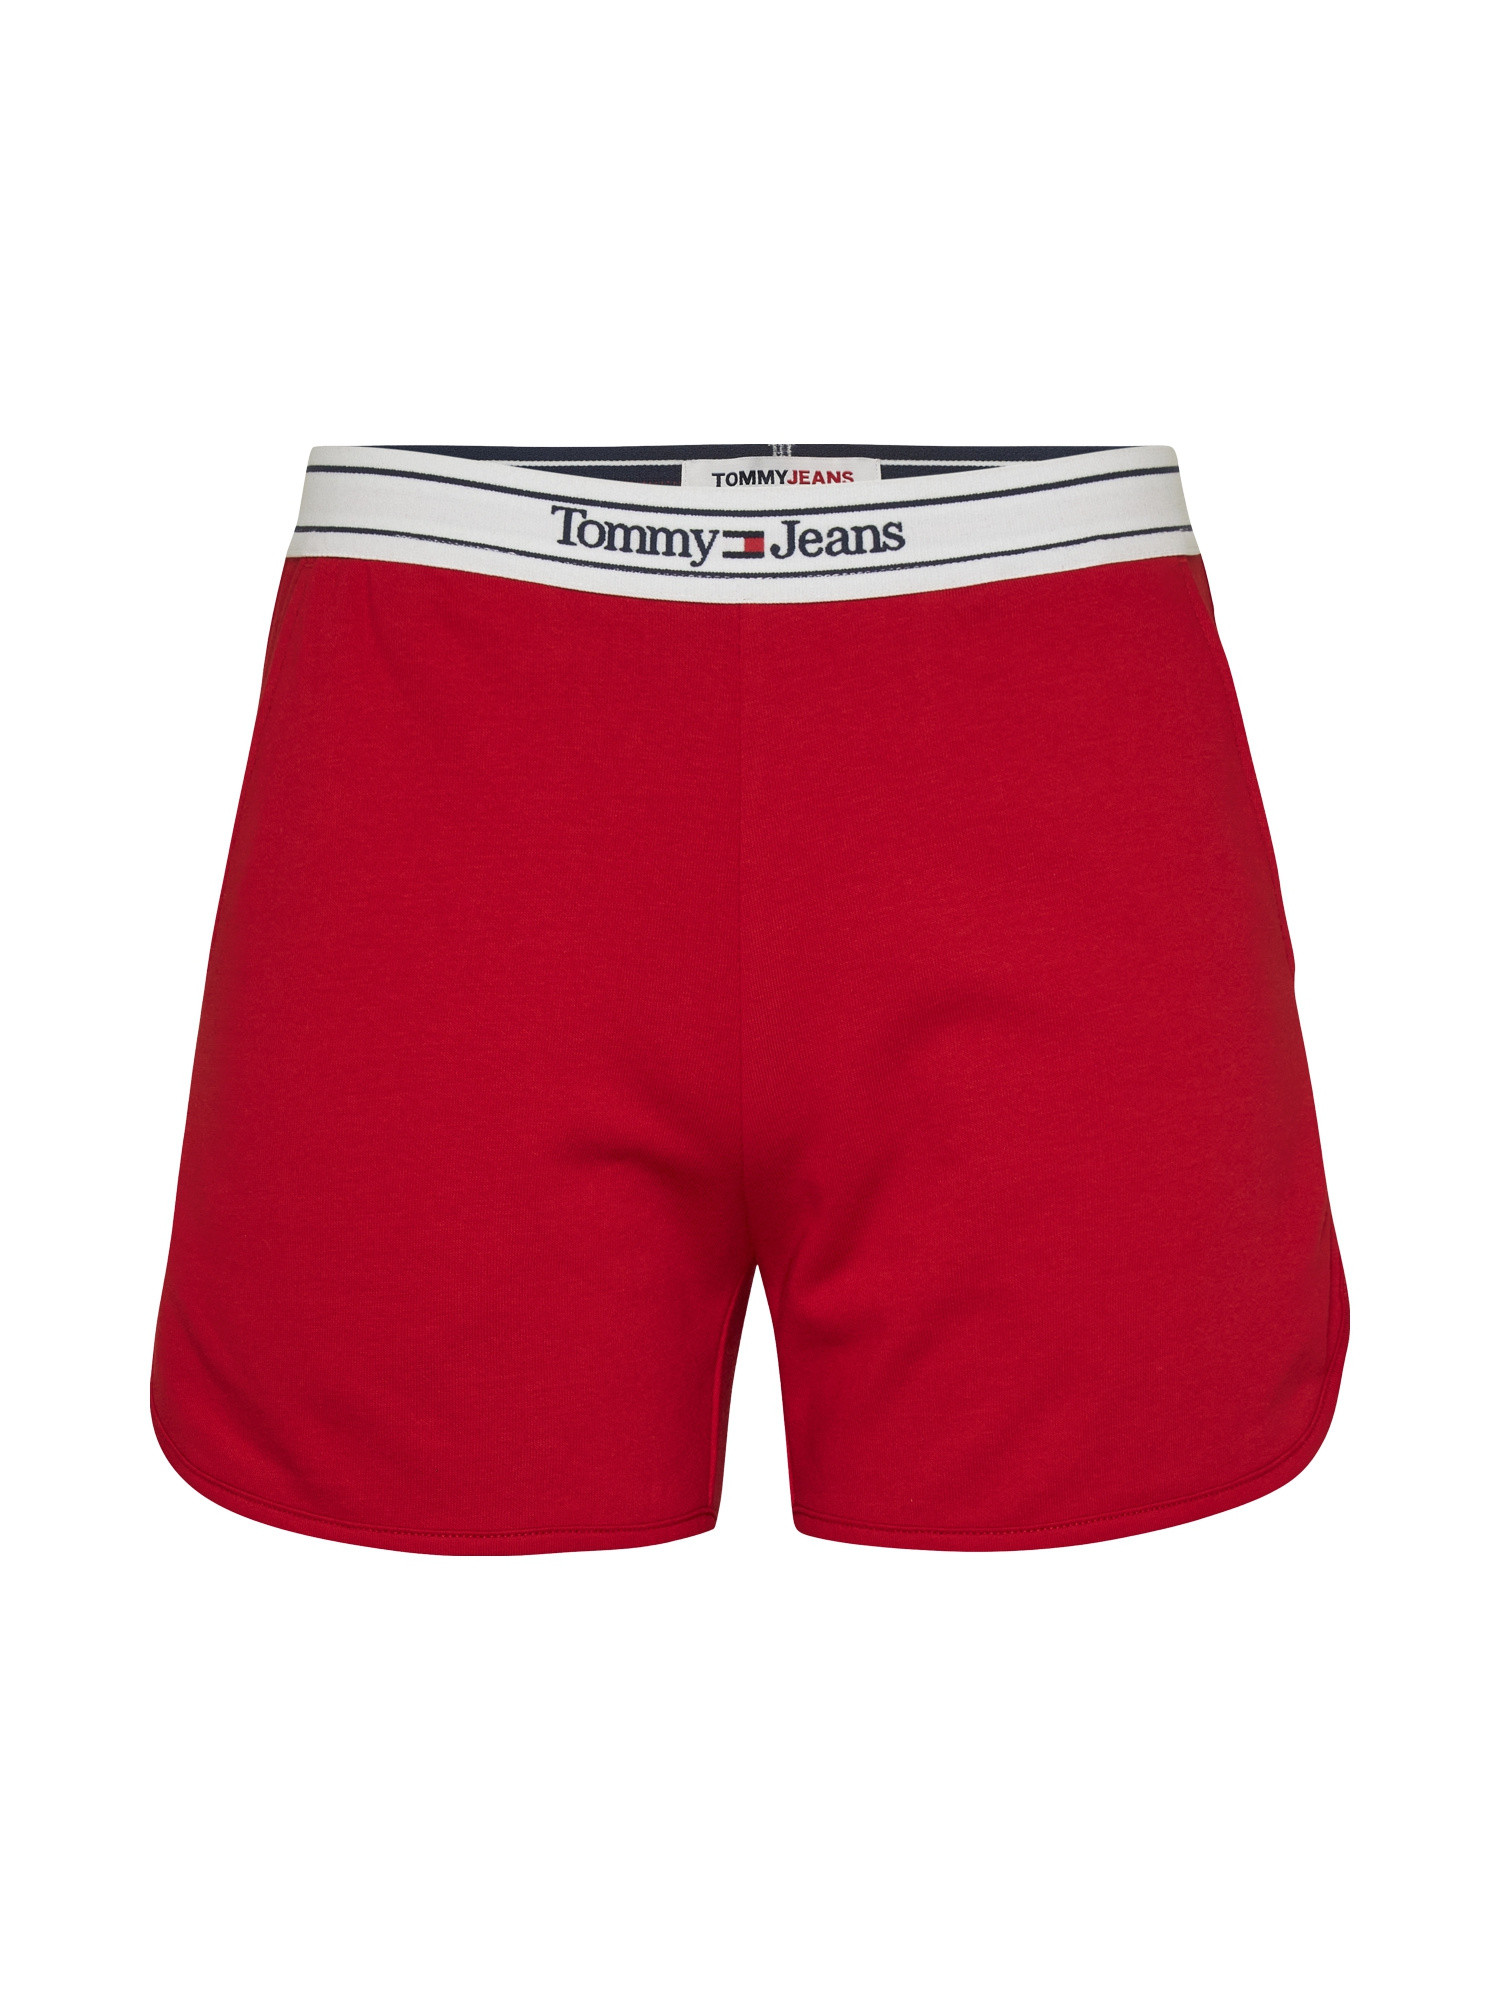 Tommy Jeans - Sports shorts with logo, Red, large image number 0